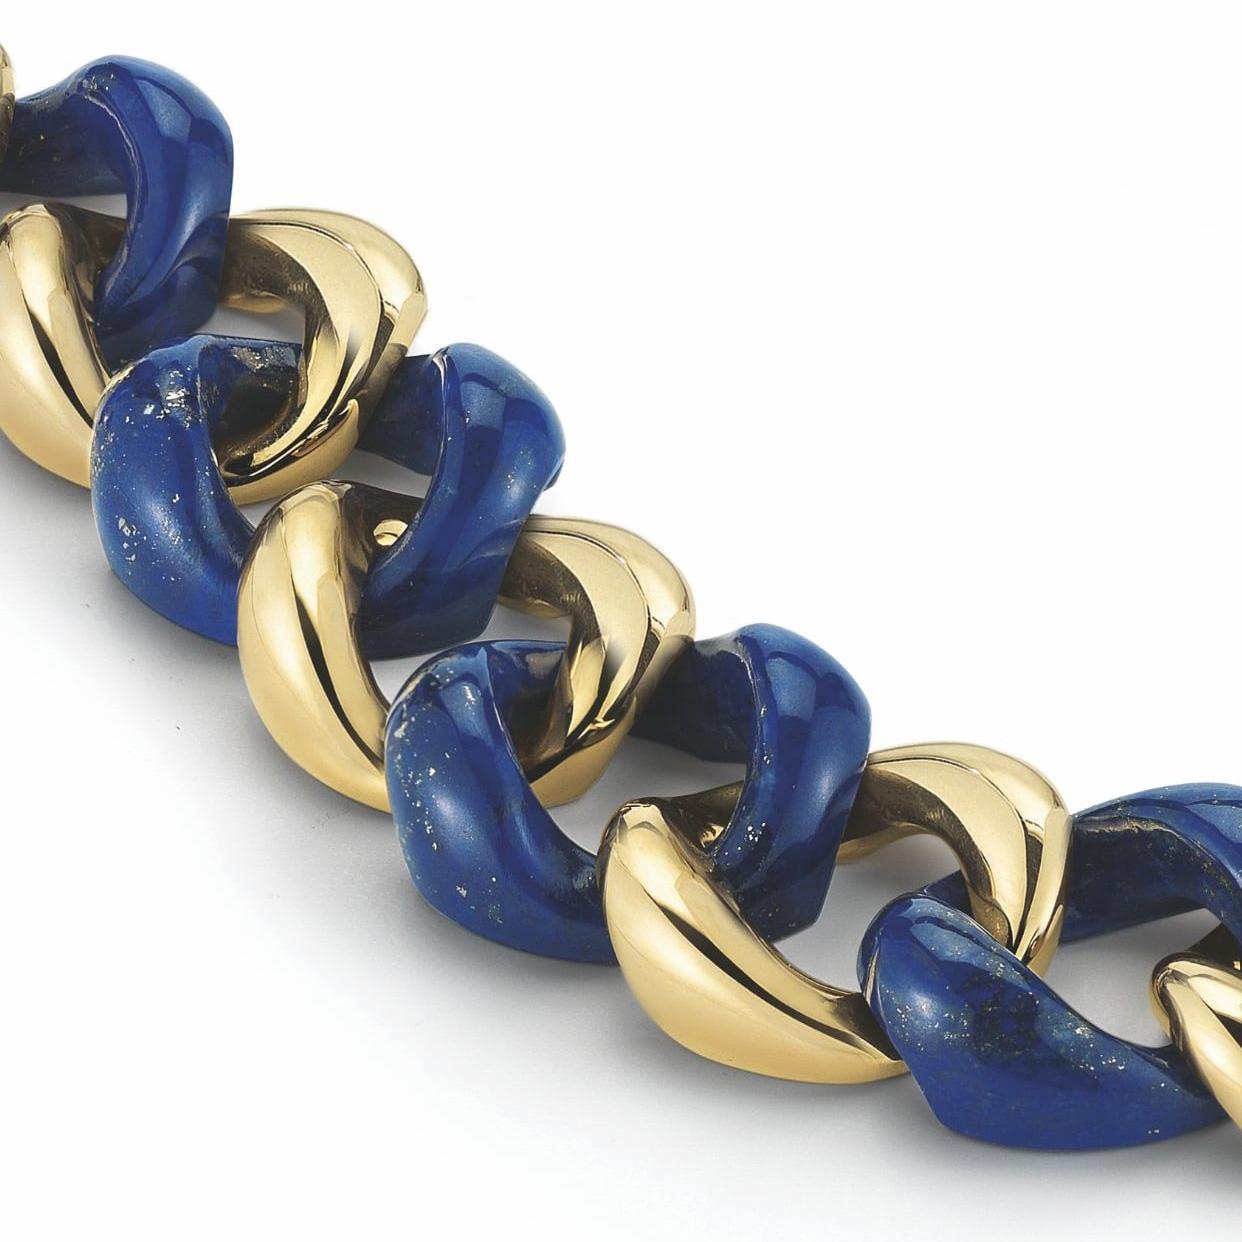 Brand new 18k gold classic large link bracelet featuring lapis links. Crafted by Seaman Schepps. Bracelet measures approximately 7 3/4 inches long, links measure 25mm wide. Weight is 101.4 grams. Marked Seaman Schepps 750 246490. Brand new with